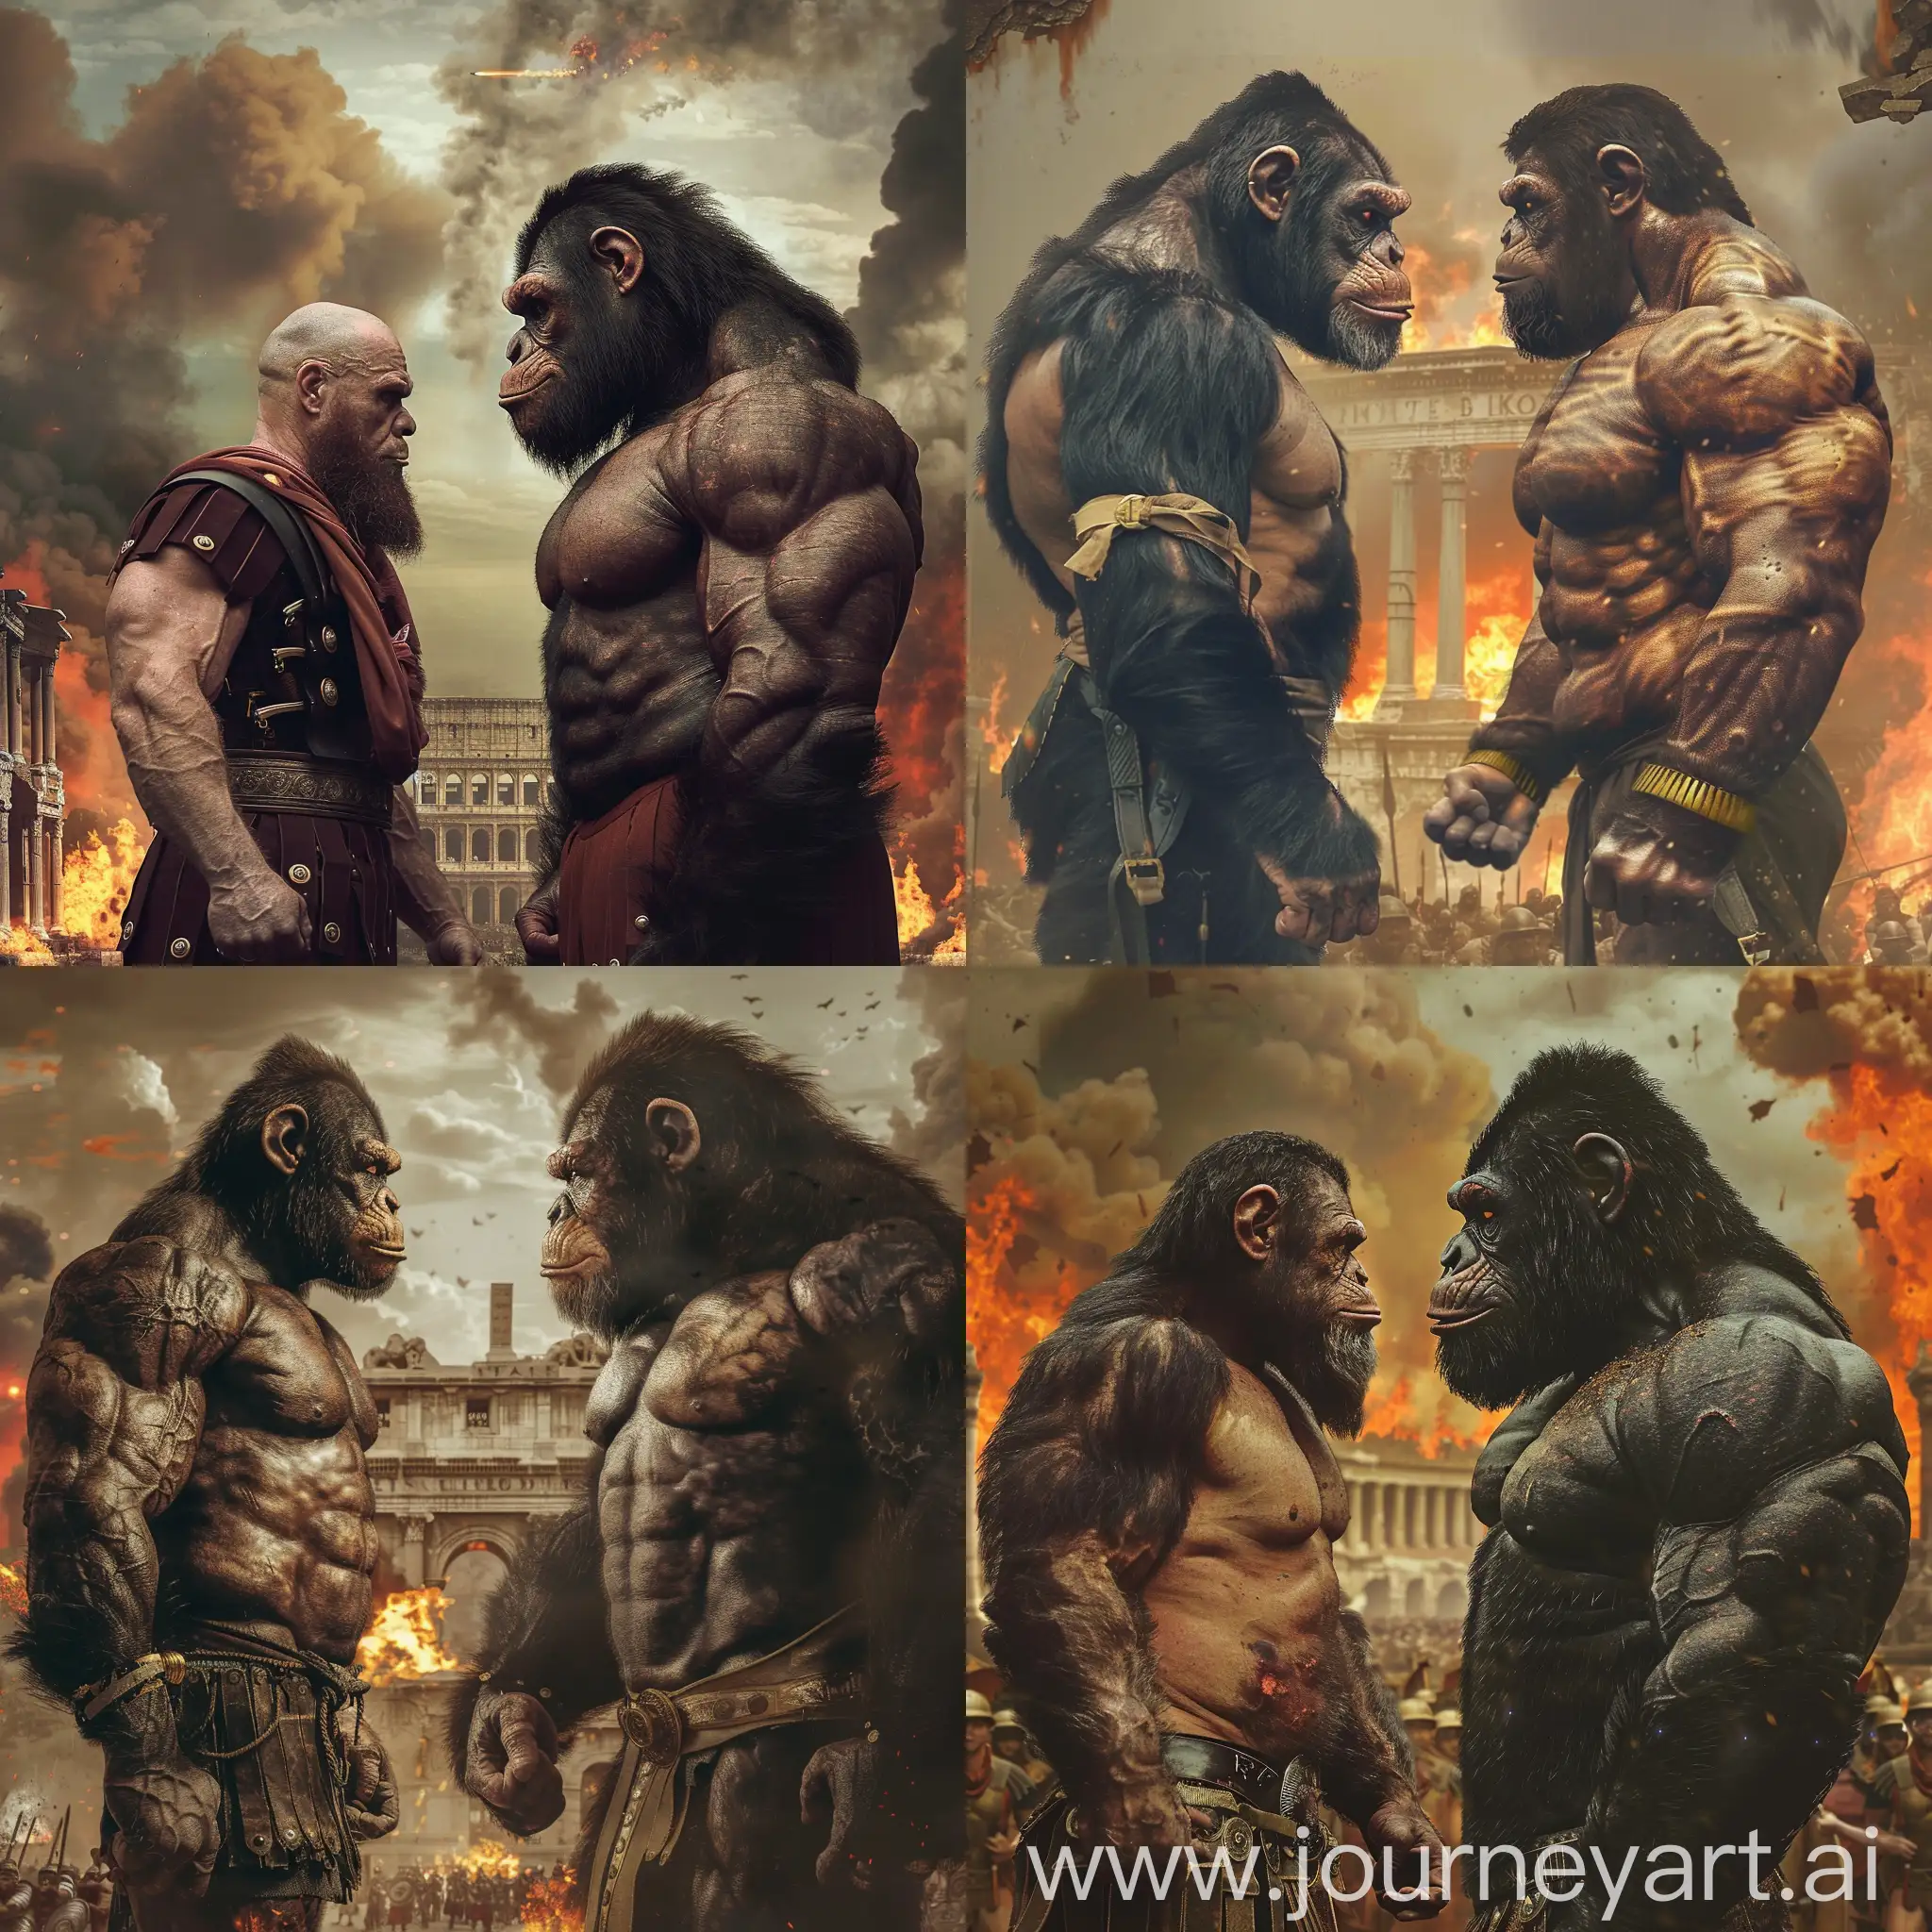 Ancient-Rome-Strongman-Apes-Franois-Legault-Side-View-in-Intense-War-Scene